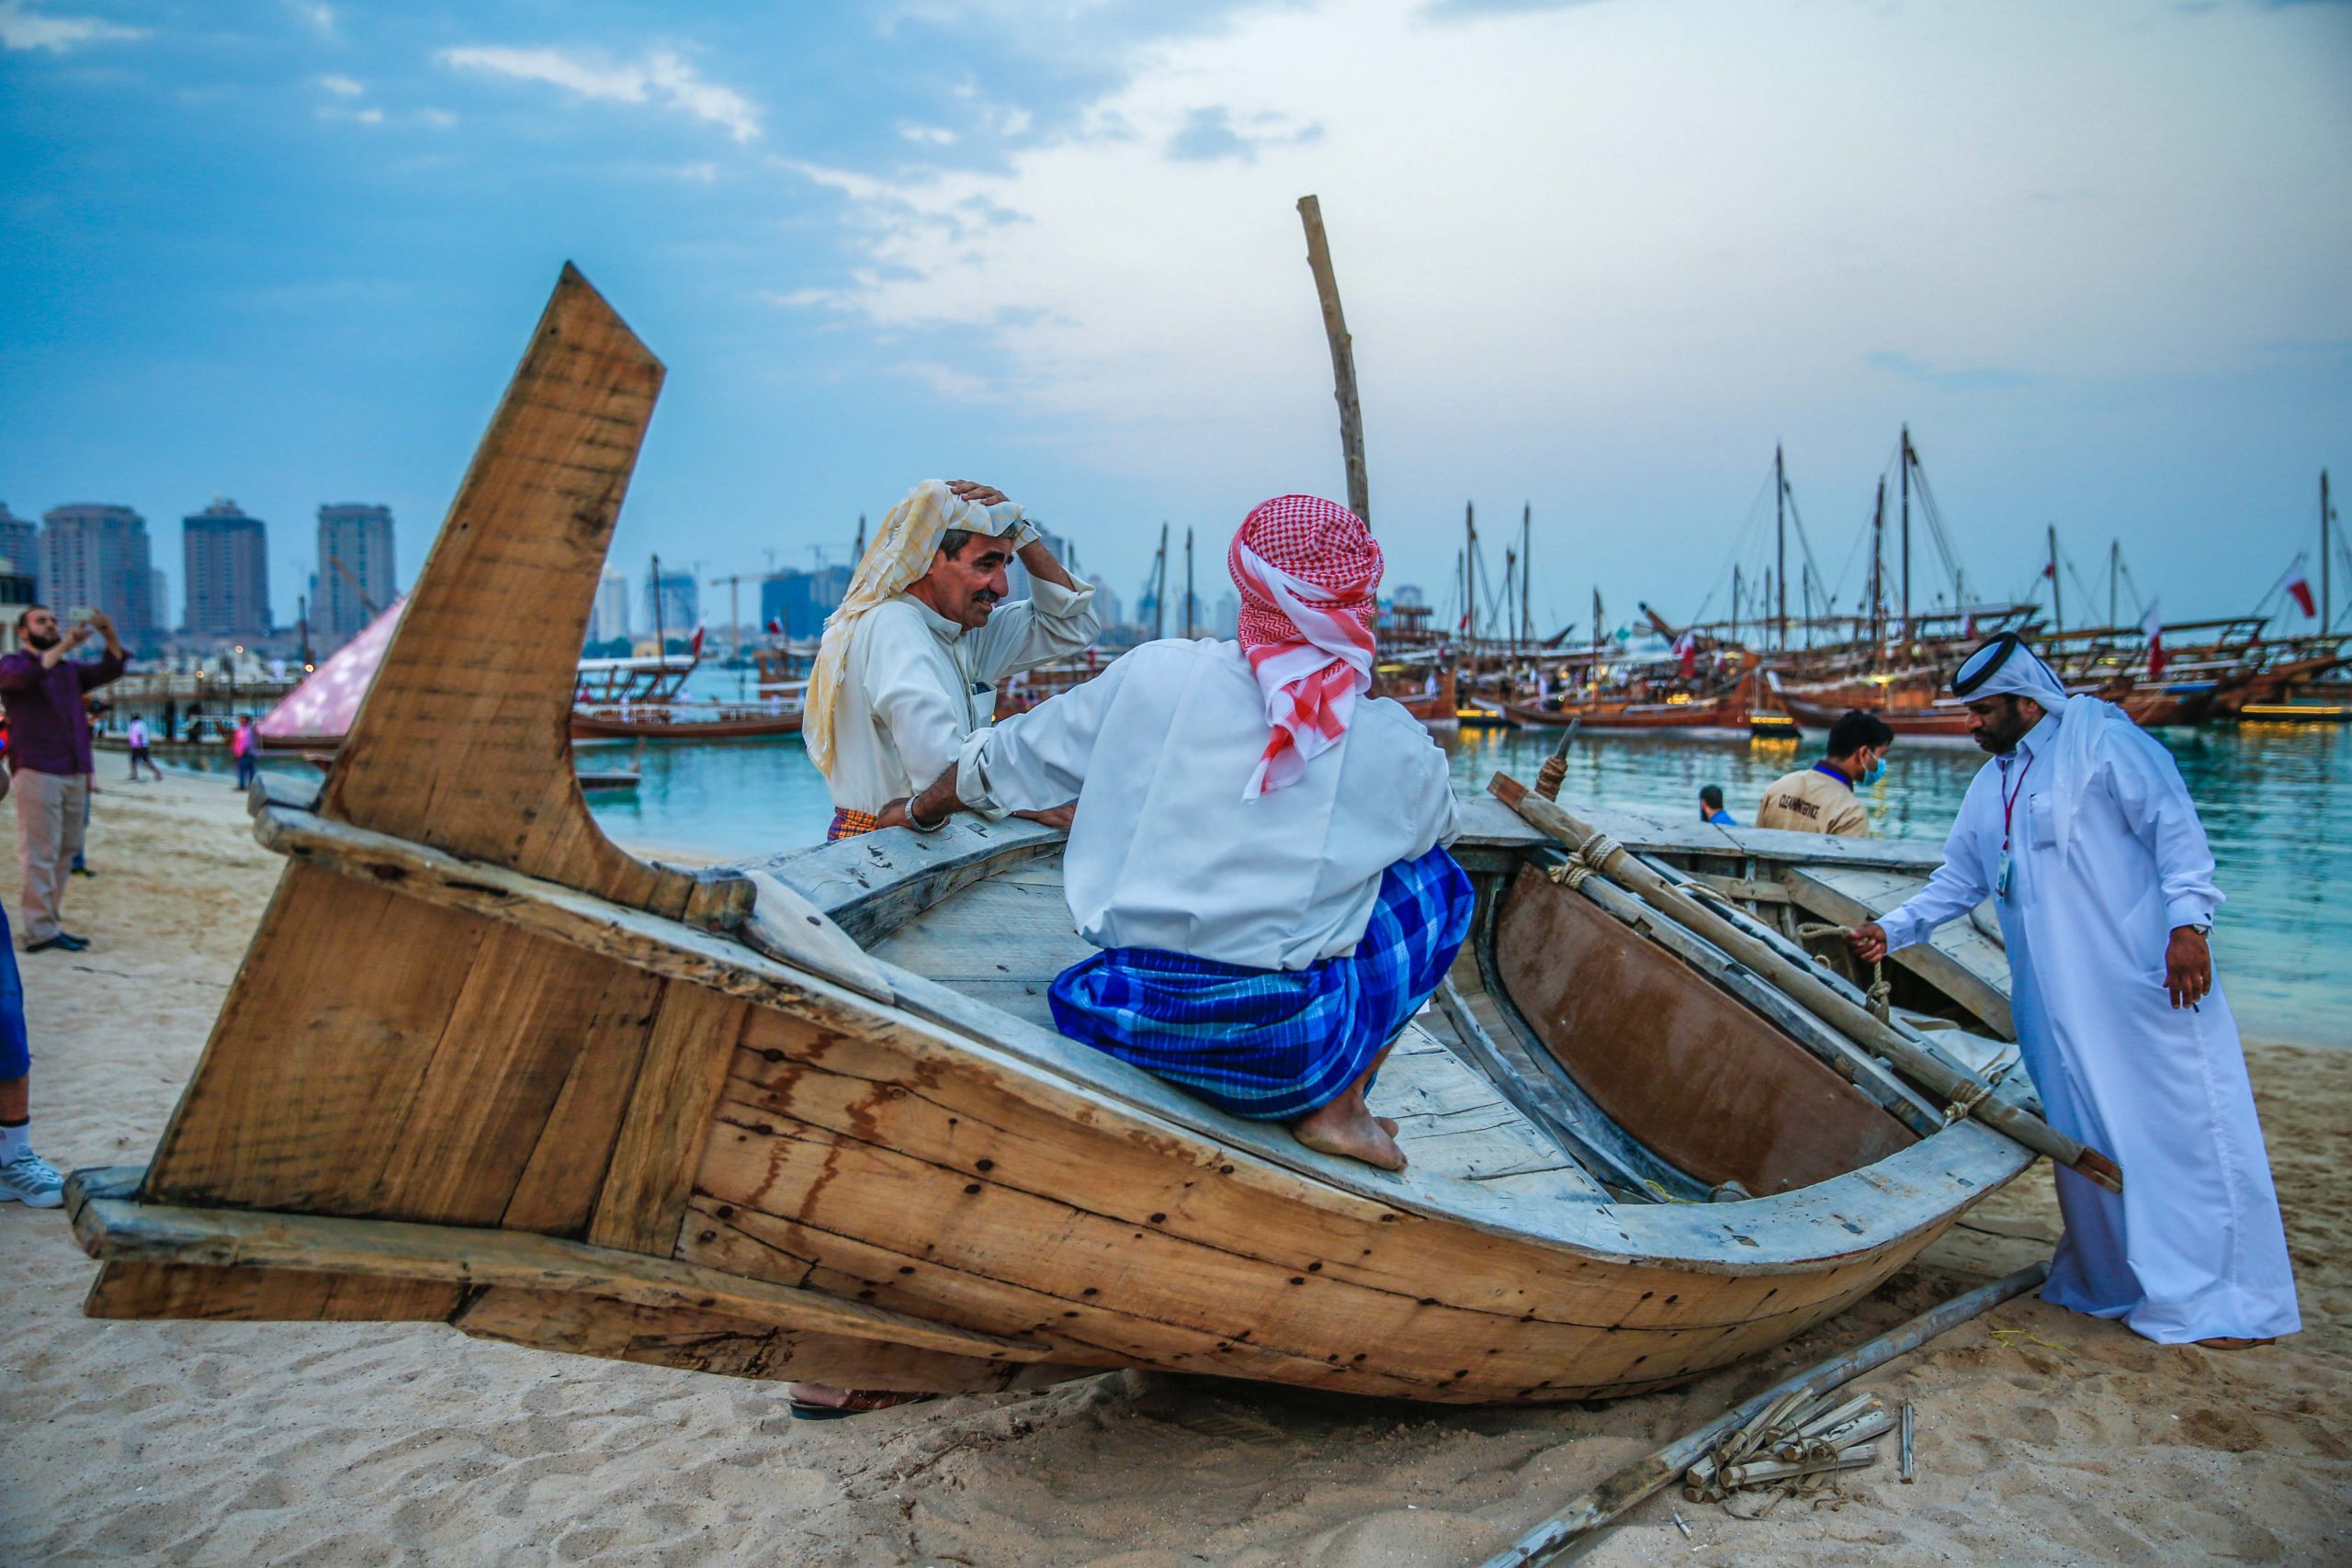 Dhow boat festival: Qatar’s long-rooted history of sailing seas